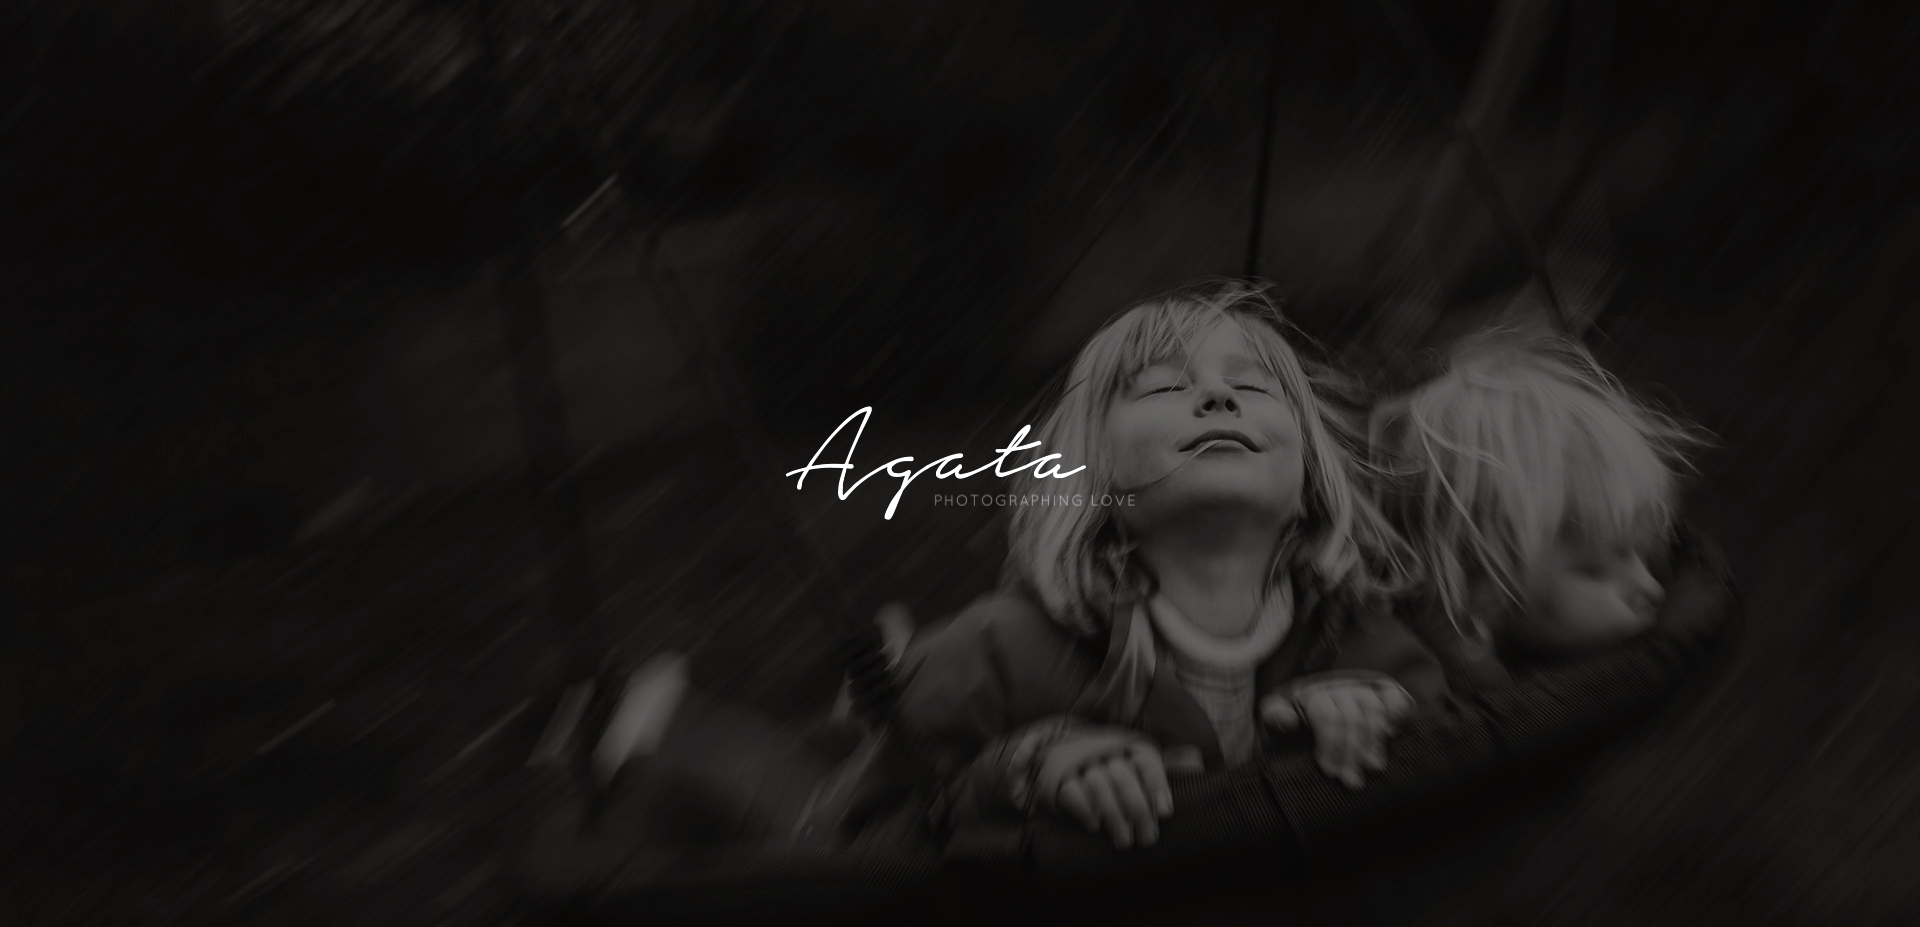 Agata photography business & corporate about page